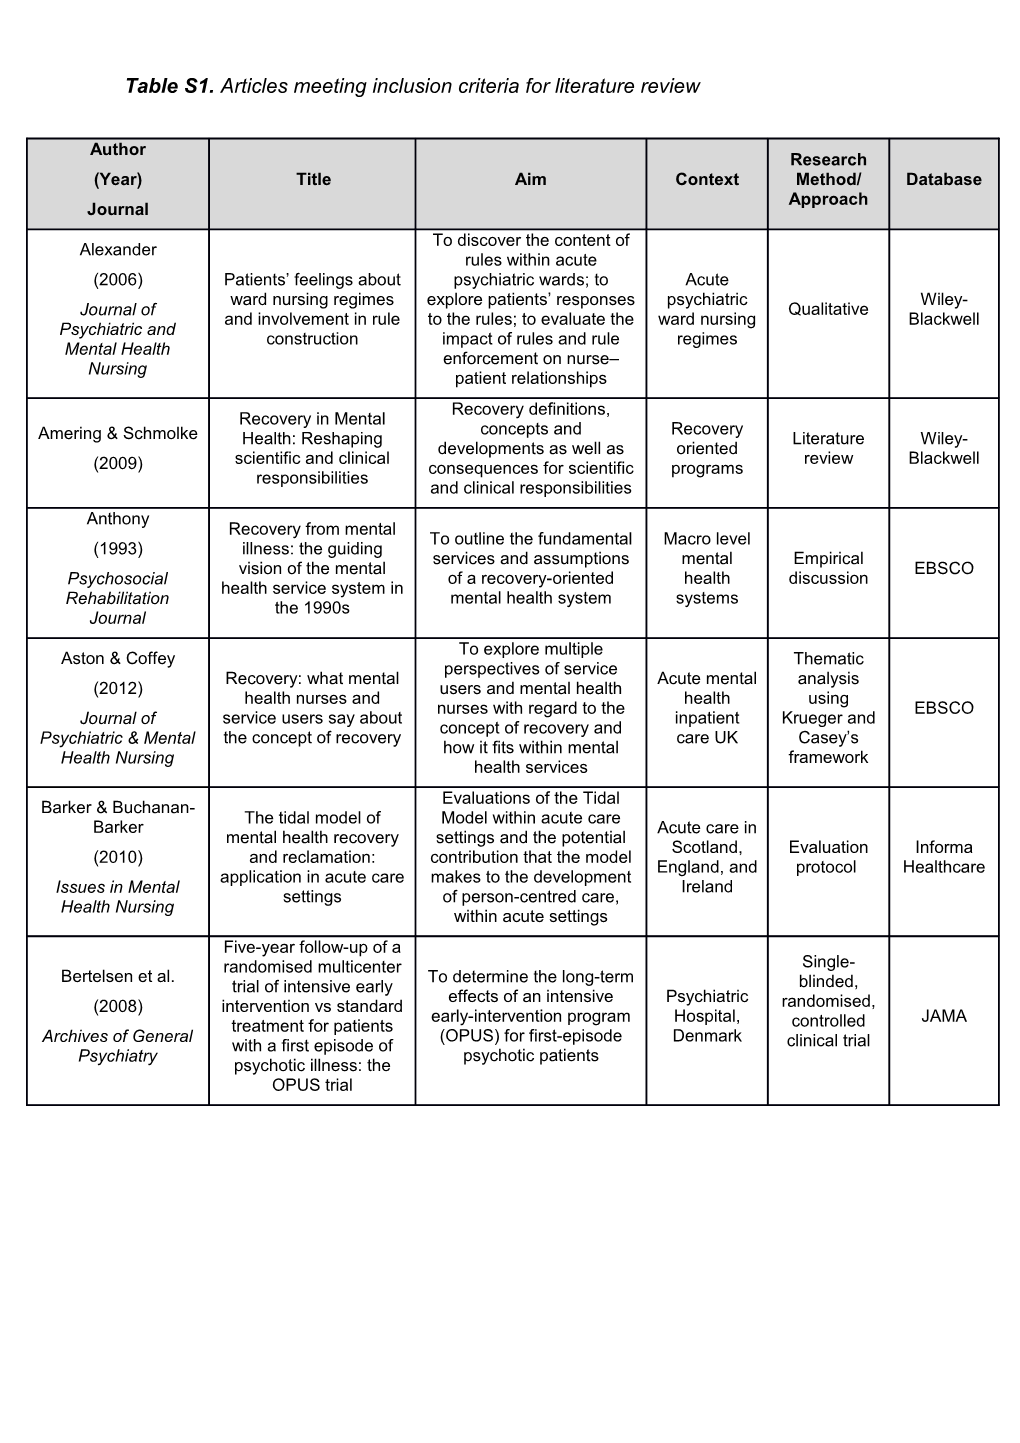 Table S1. Articles Meeting Inclusion Criteria for Literature Review